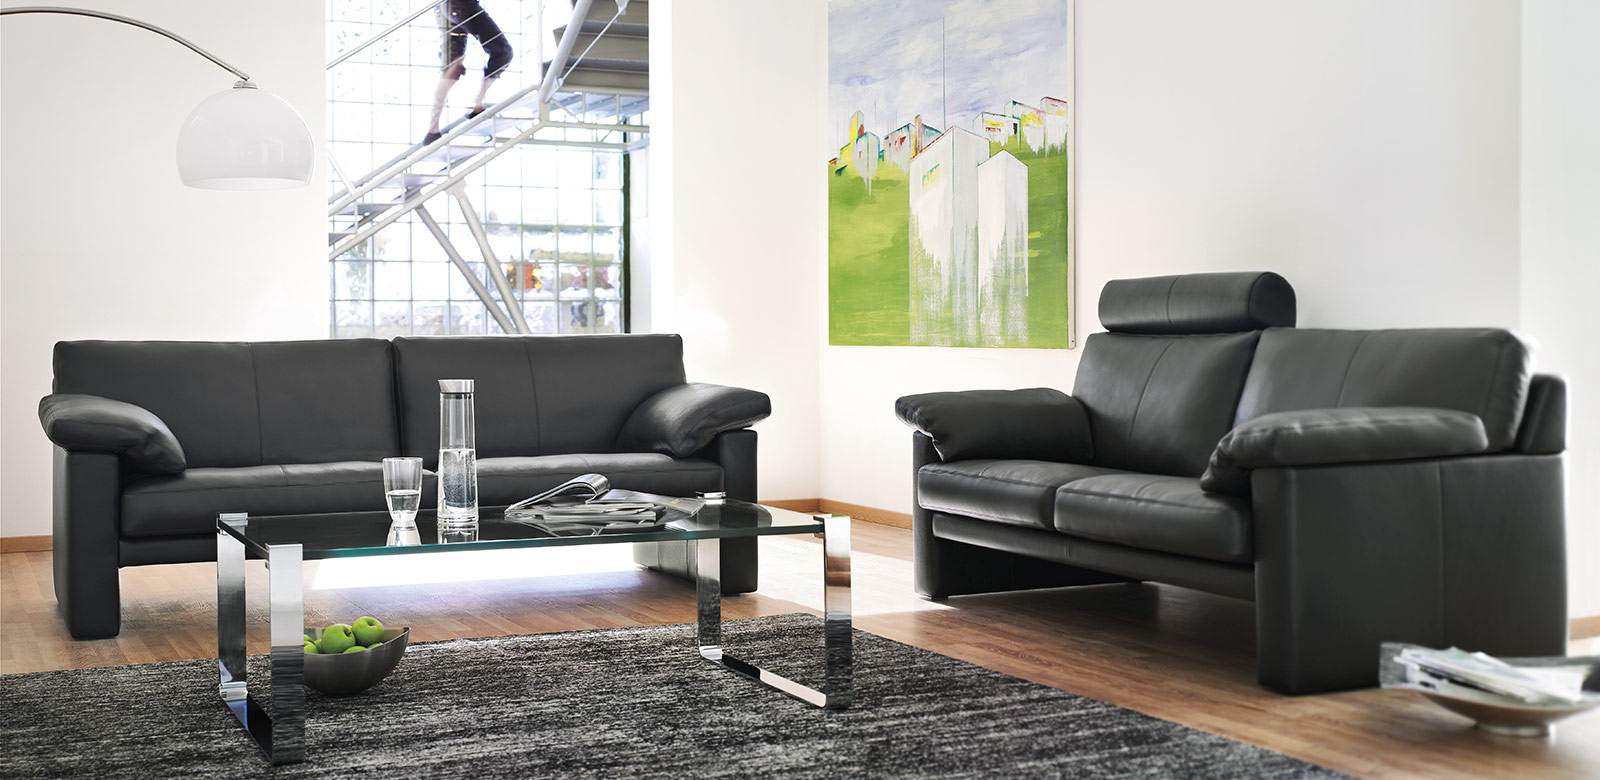 Two CL300 sofas in black leather with armrest cushions, headrest and matching glass table in modern, multi-level living room.